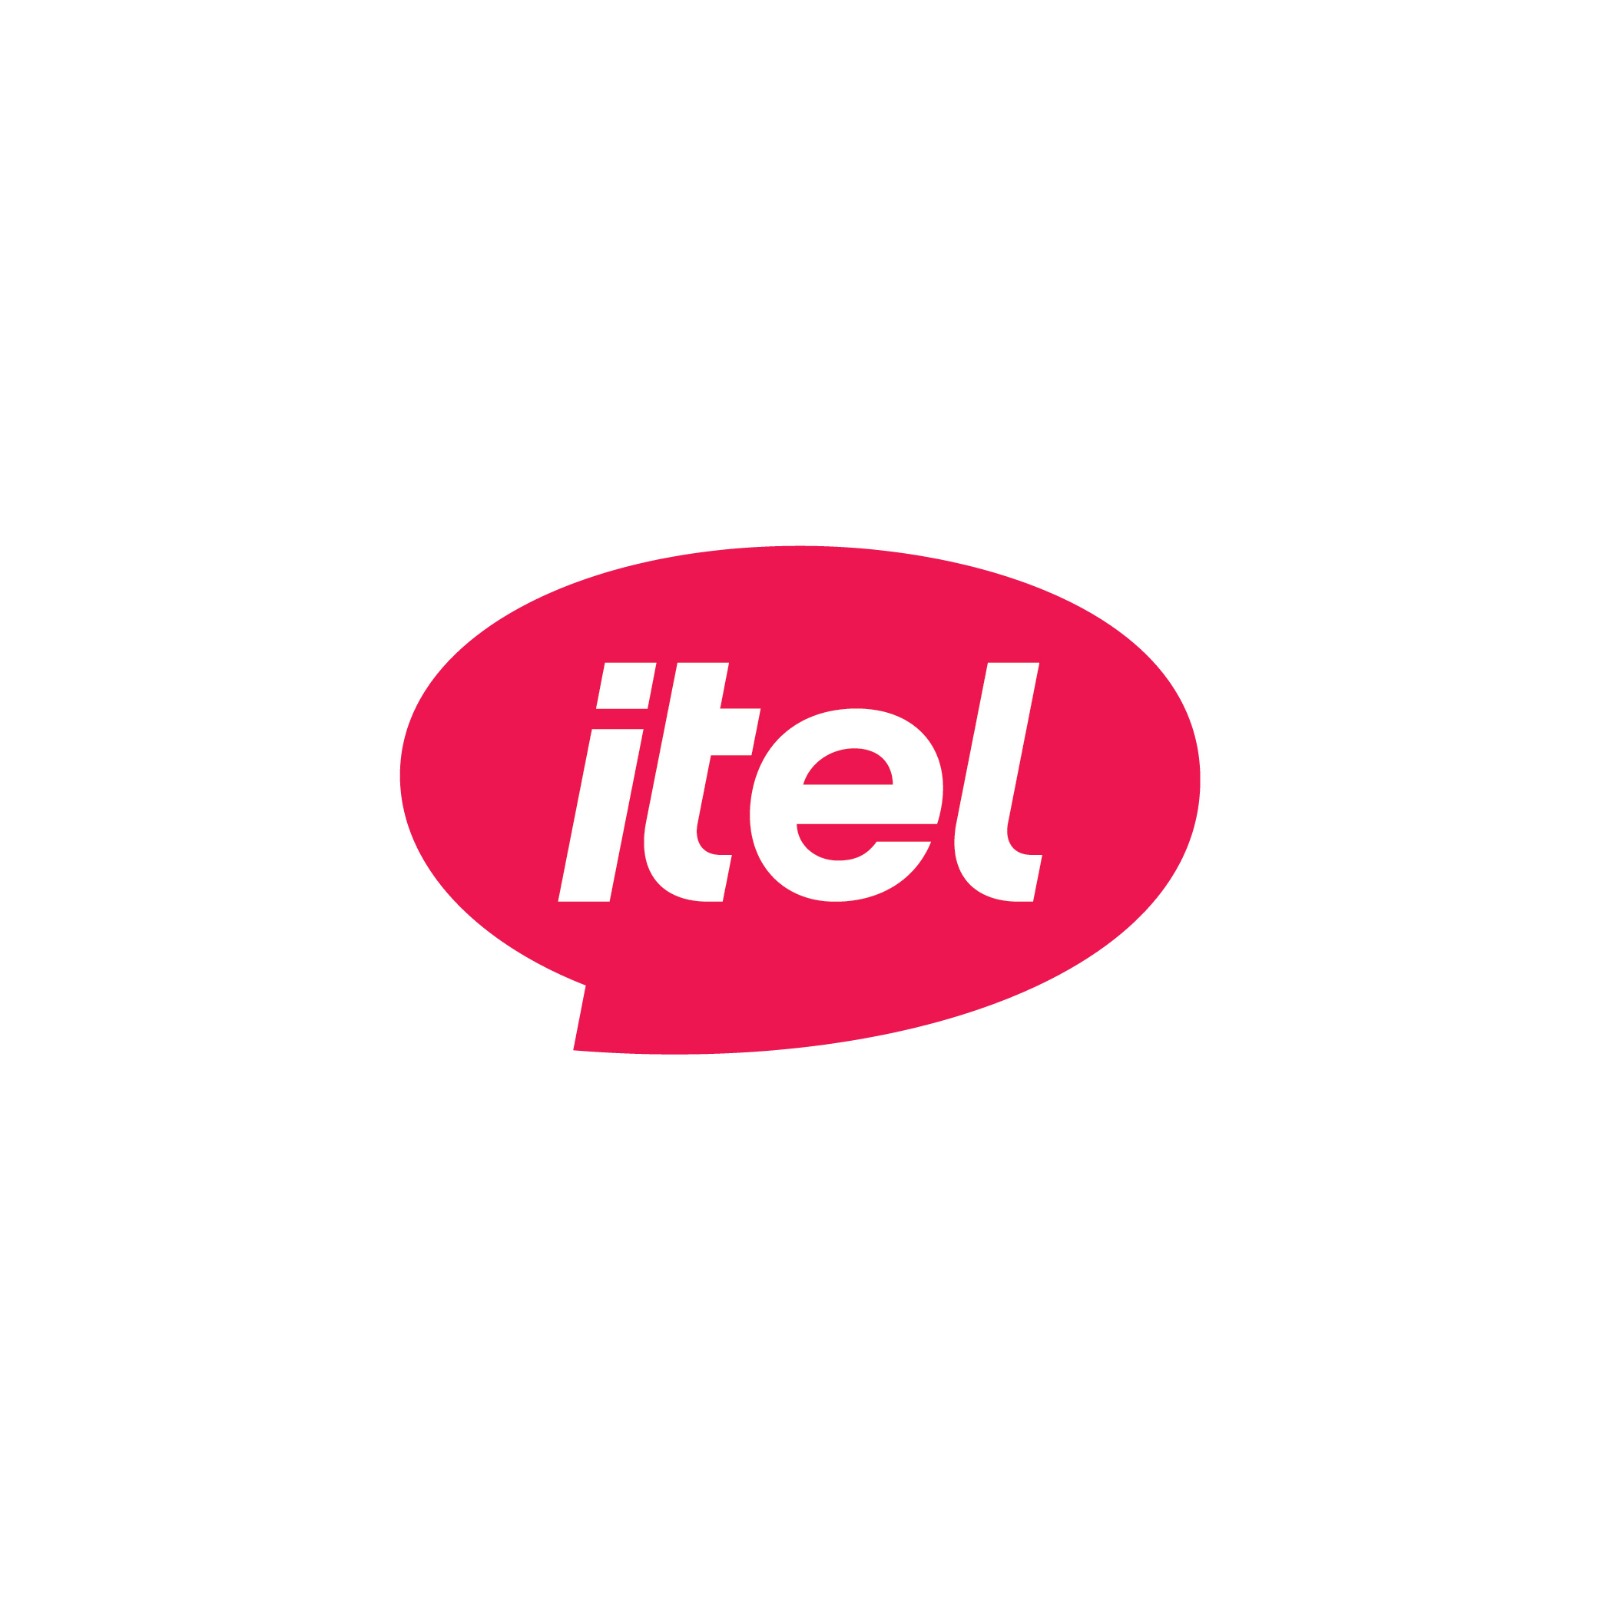 itel stays top choice for users looking for 4G and 5G budget friendly smartphones: CMR Study